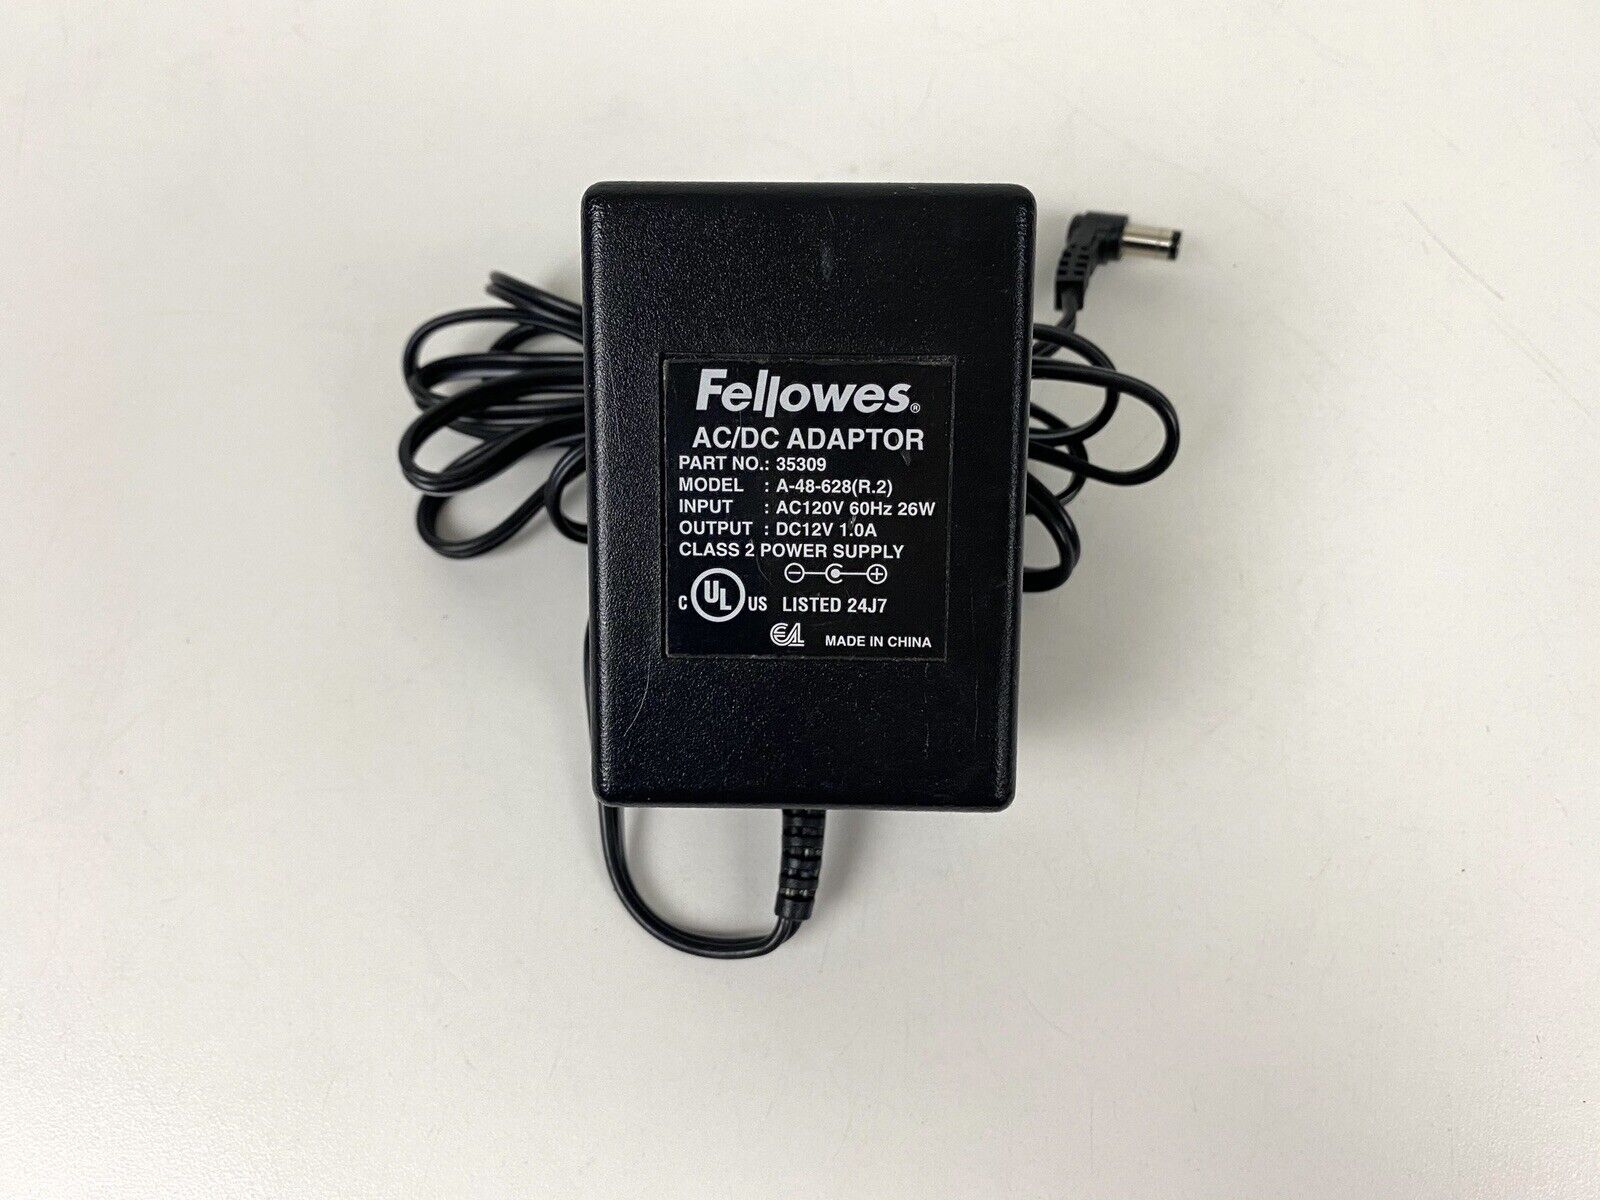 Fellowes Paper Cutter AC/DC adapter 35309 Power Supply A-48-628 r.2 Features: Powered Brand: FELLOWES Type: AC/DC A